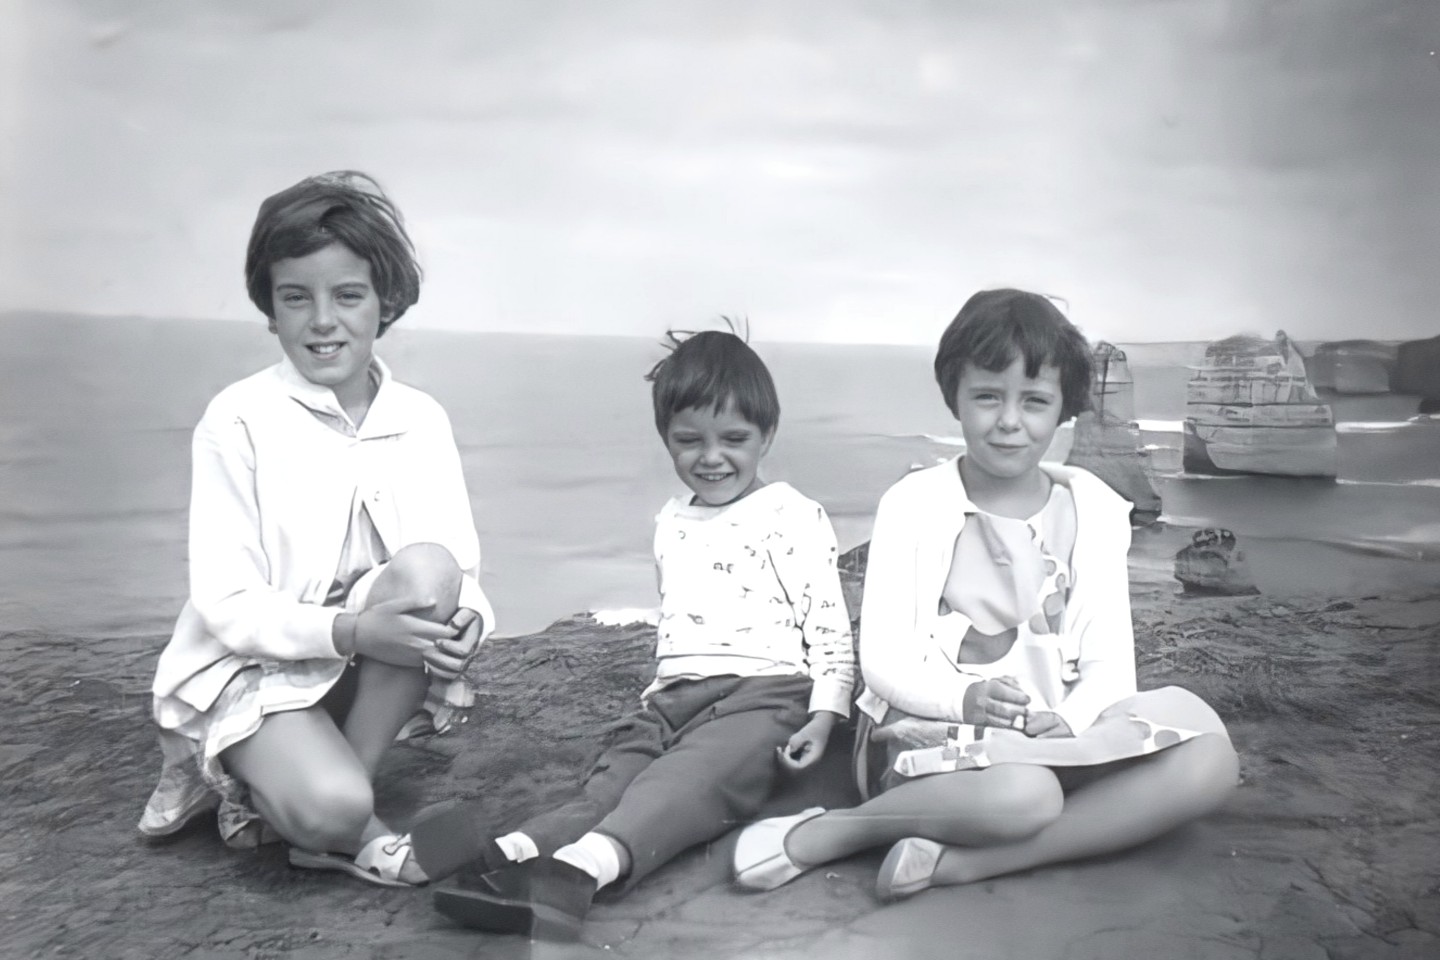 Jane, Grant and Arnna Beaumont, photographed during a 1965 family trip to the Twelve Apostles near Port Campbell, Victoria, Australia.